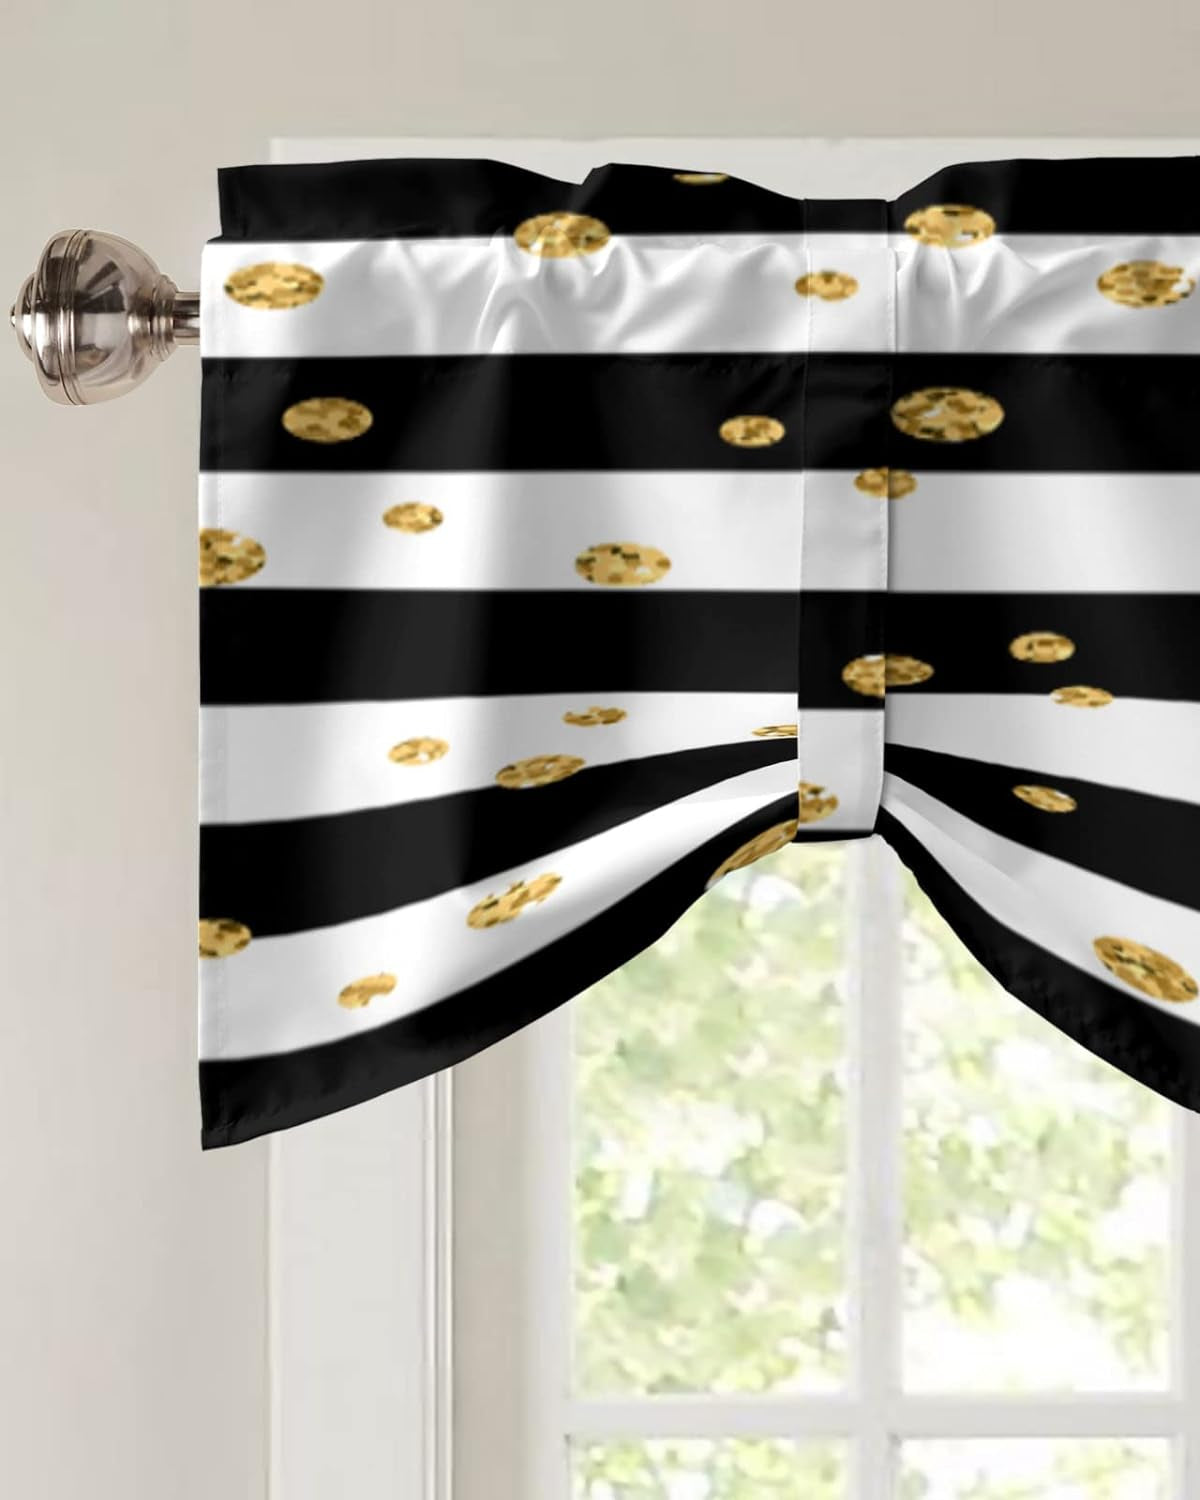 Christmas Tie up Valance Curtains for Kitchen Windows, White and Black Stripe Polka Dot Valance Rod Pocket Window Treatment Valances for Living Room Bathroom Bedroom, 54X18 Inches